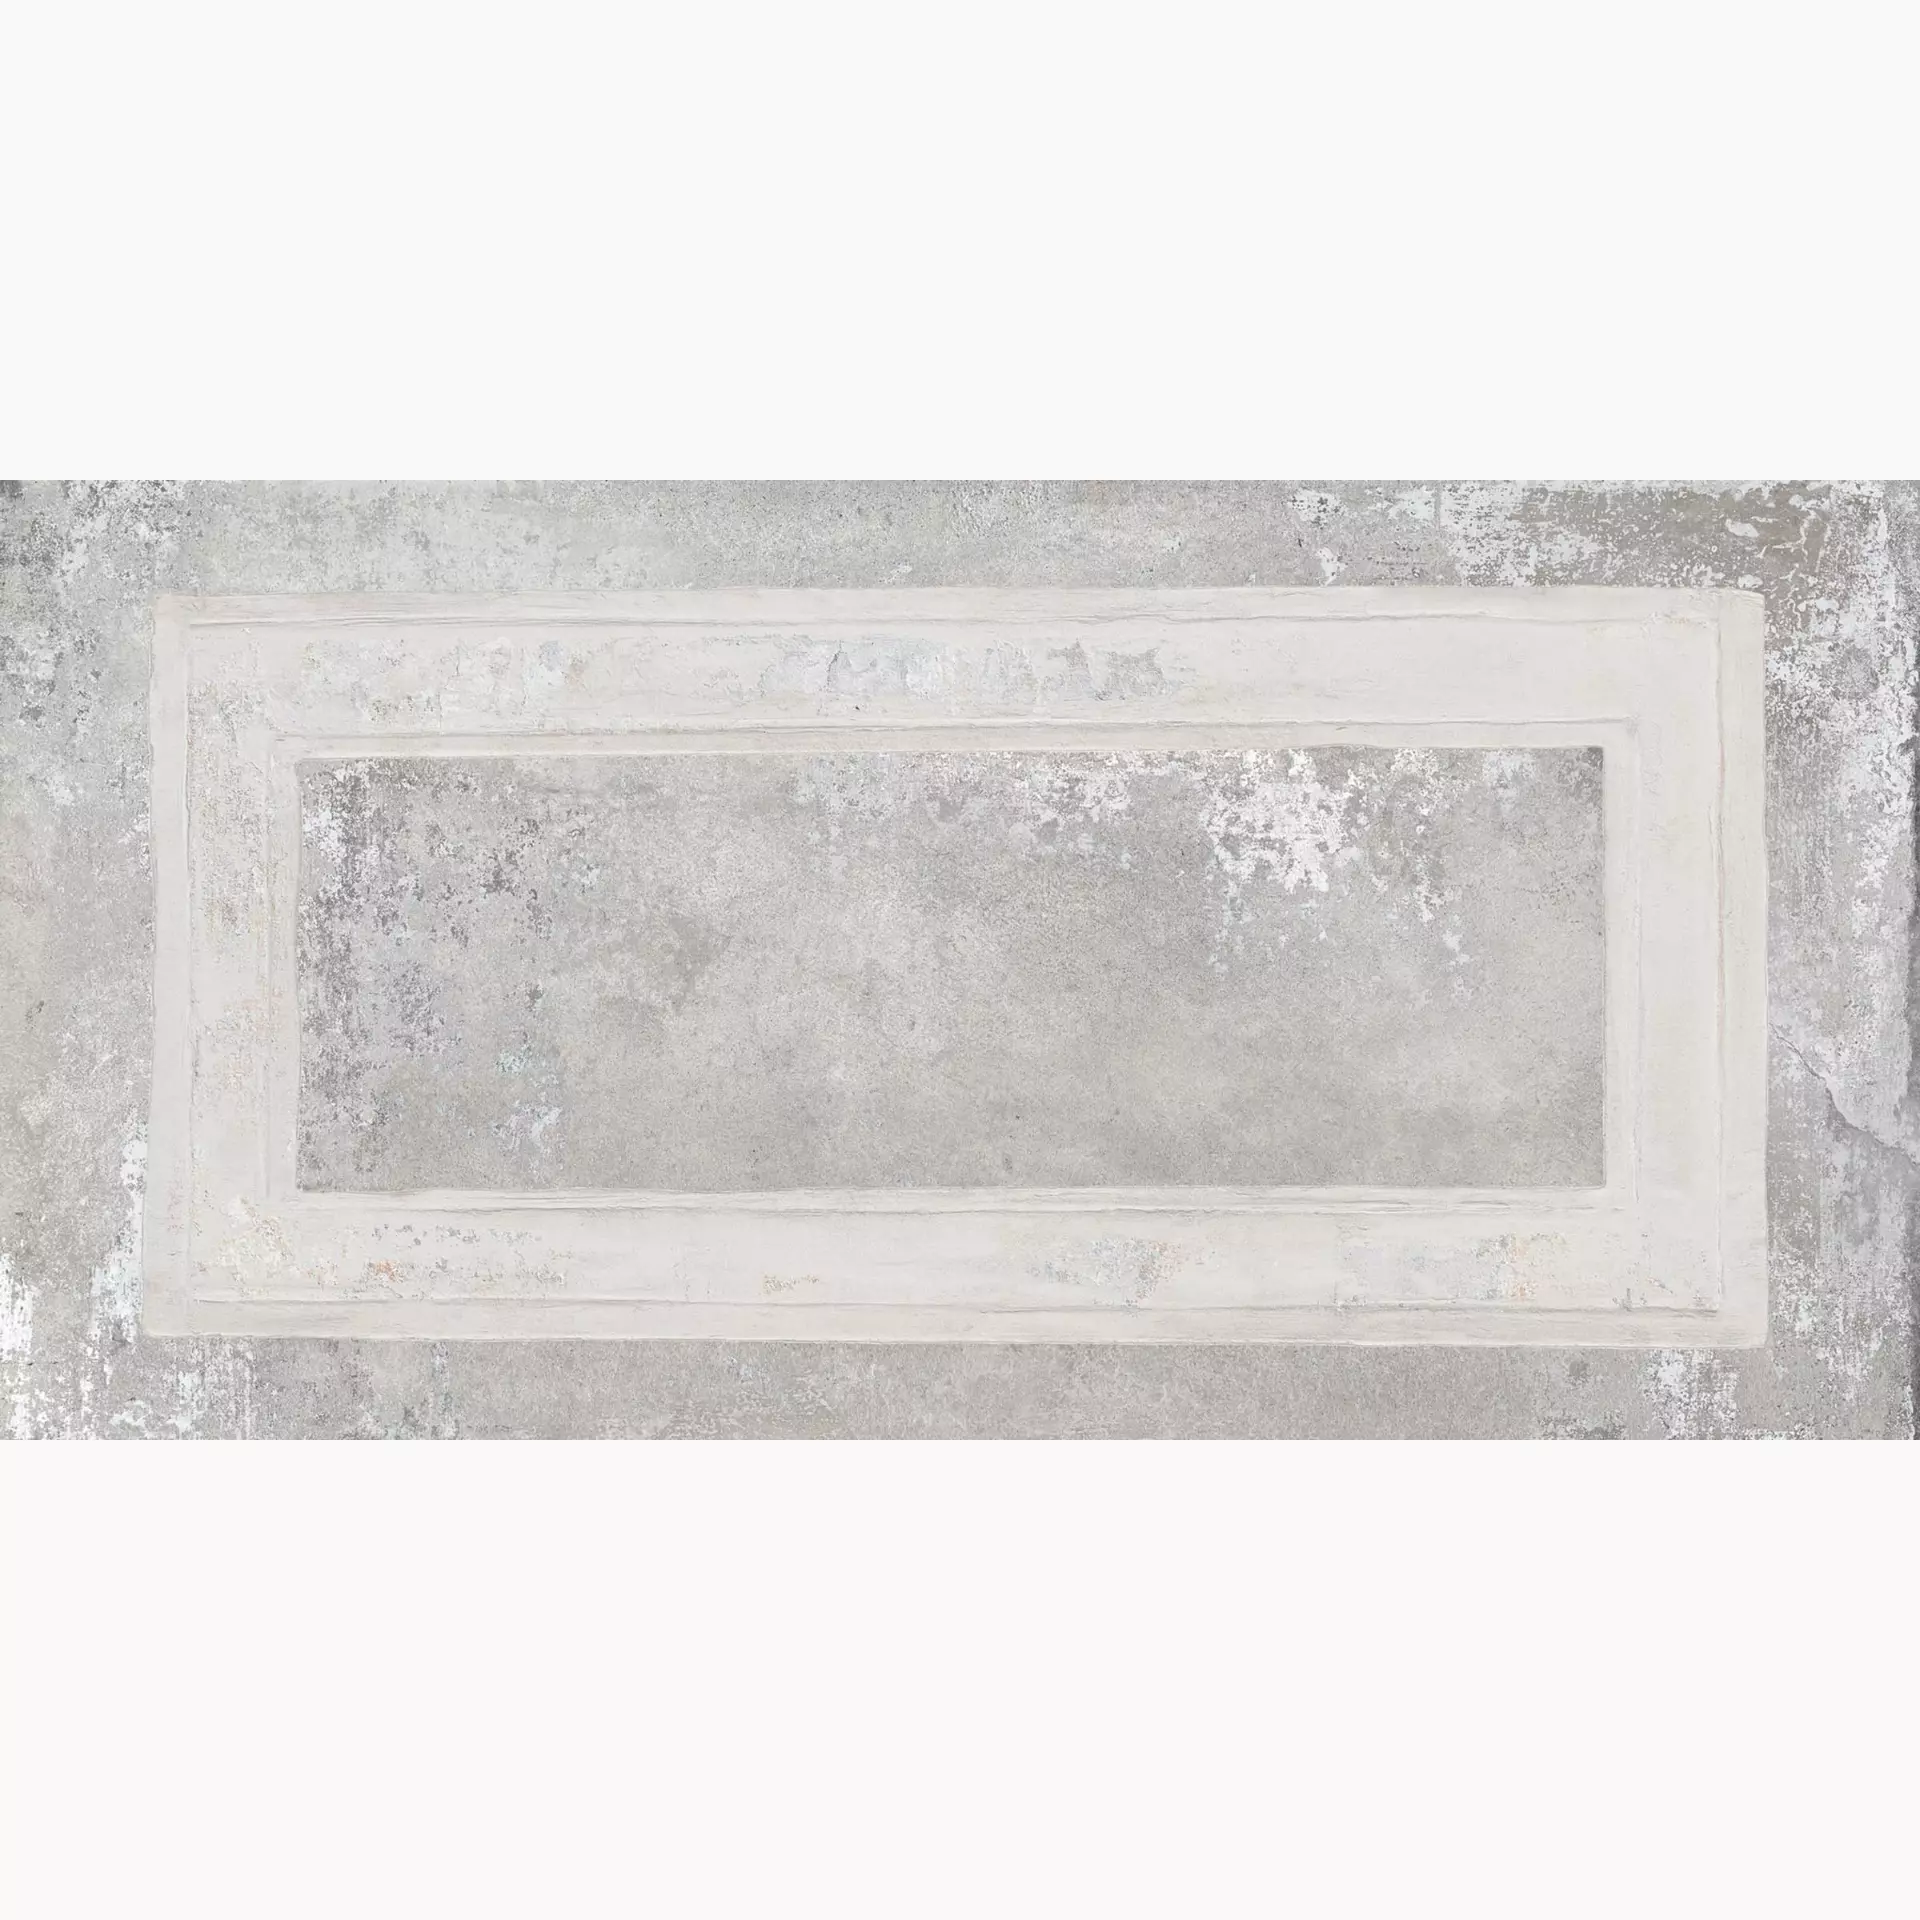 ABK Ghost Grey – Ivory Naturale Boiserie PF60004773 60x120cm rectified 8,5mm